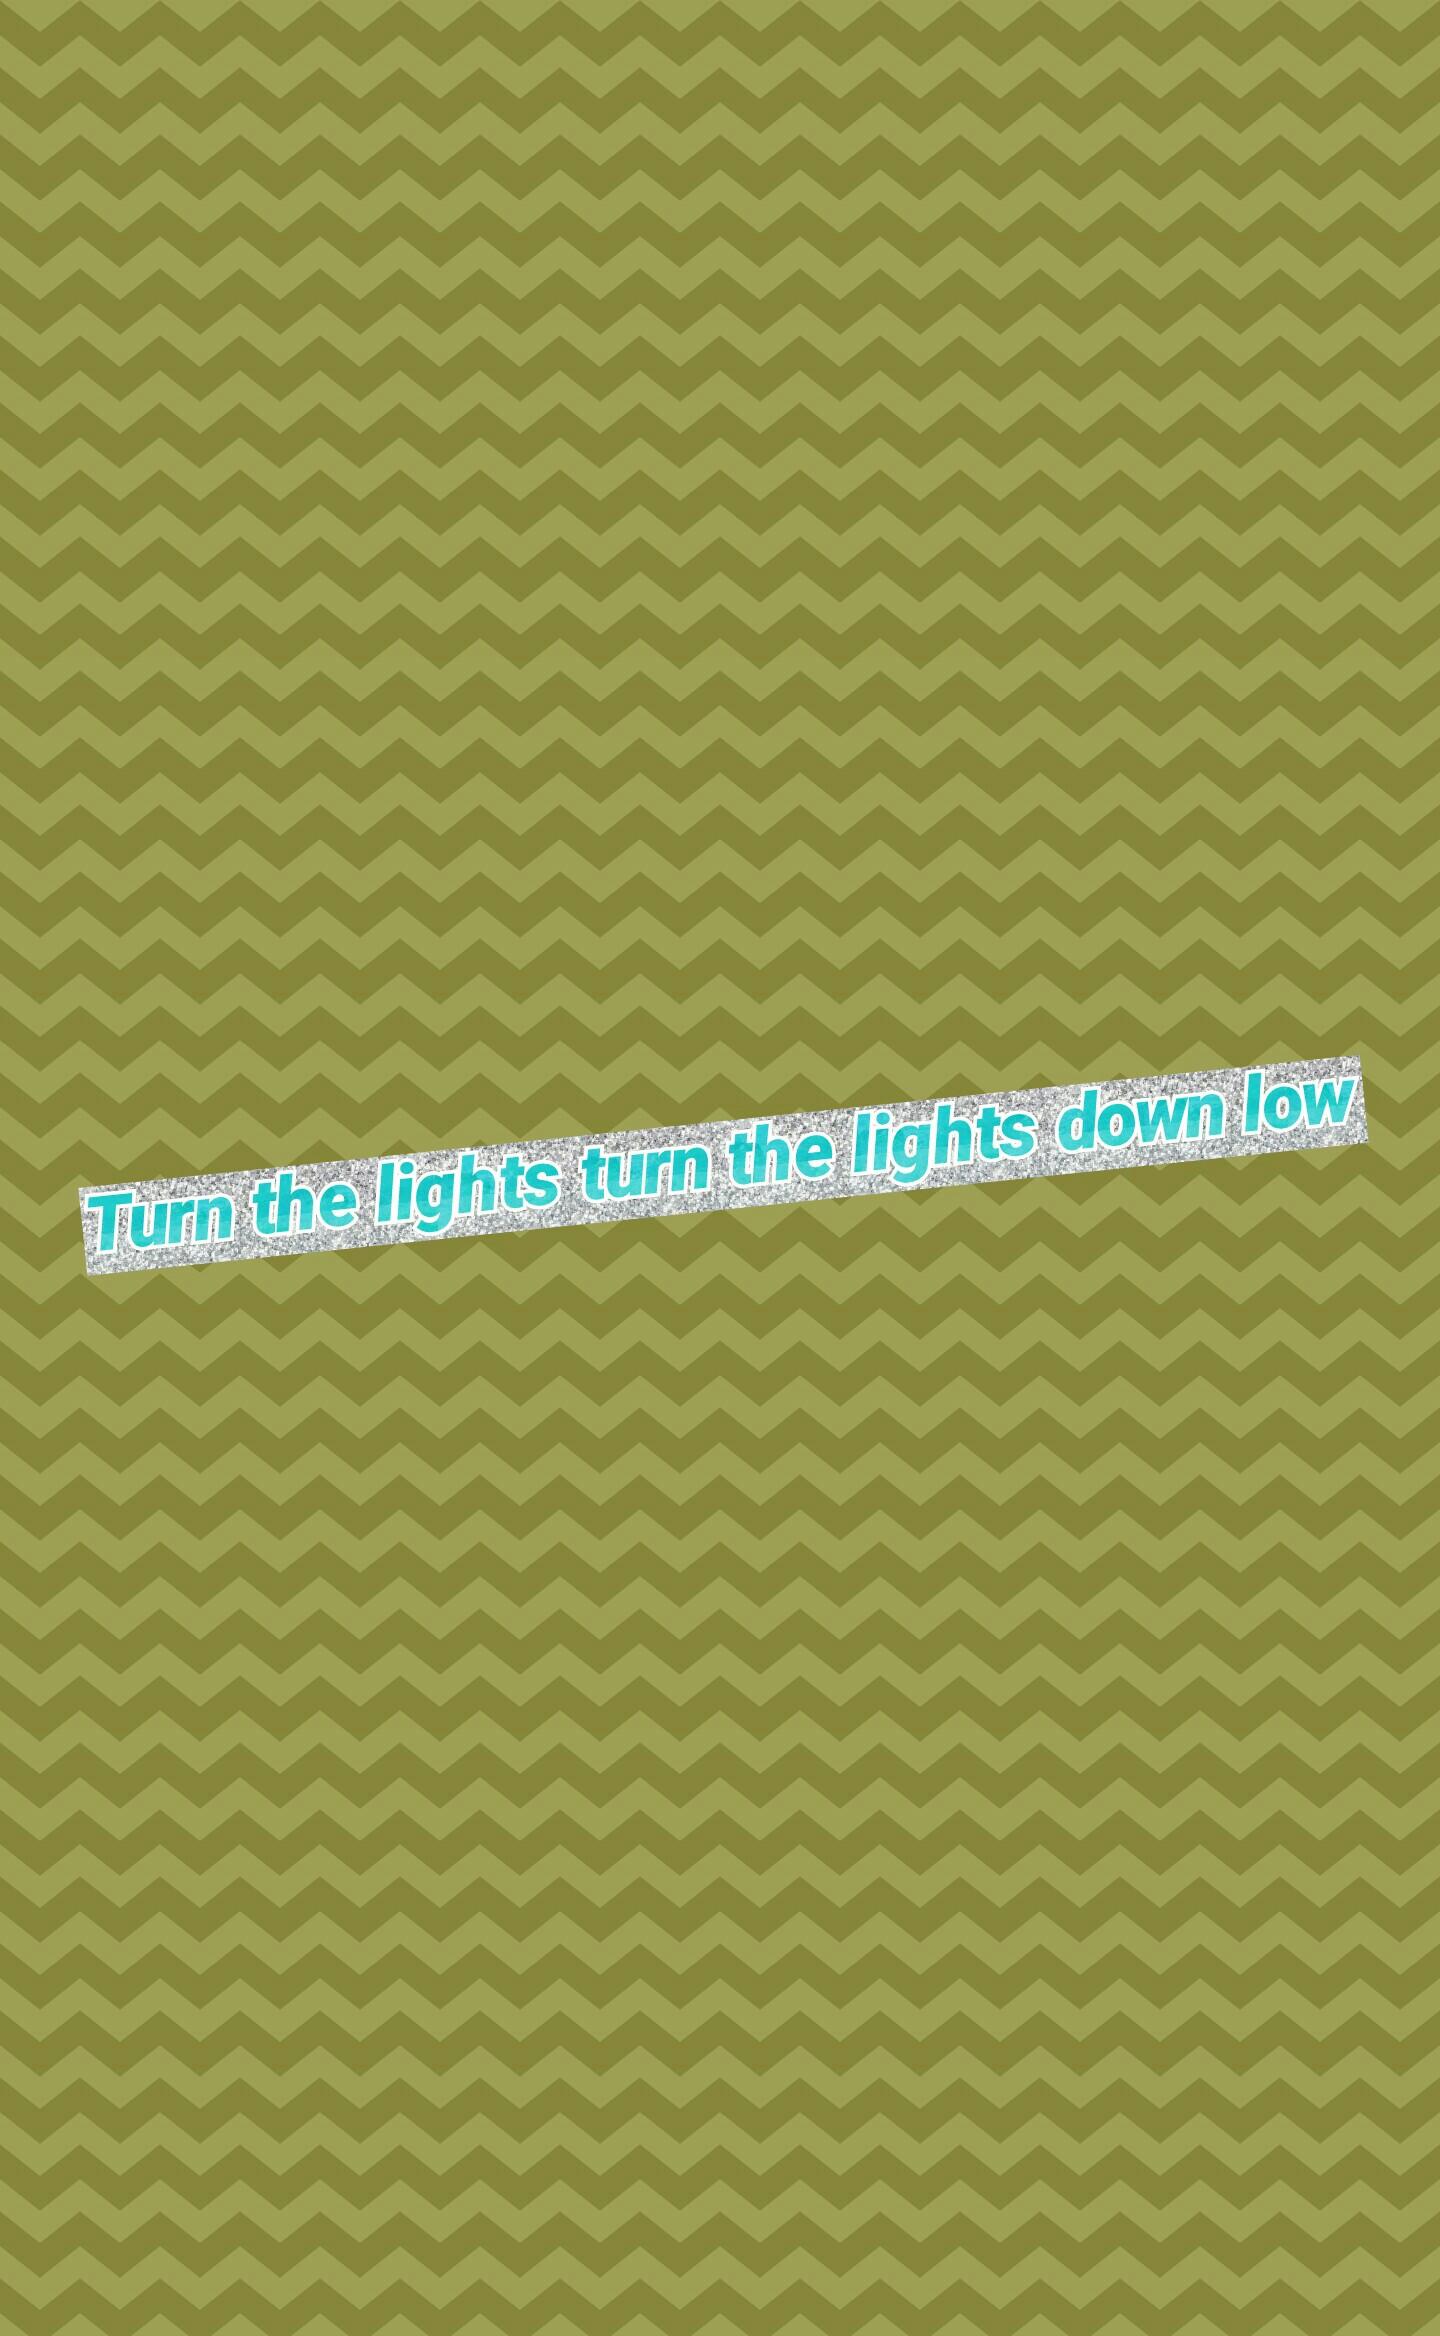 Turn the lights turn the lights down low LOVE This